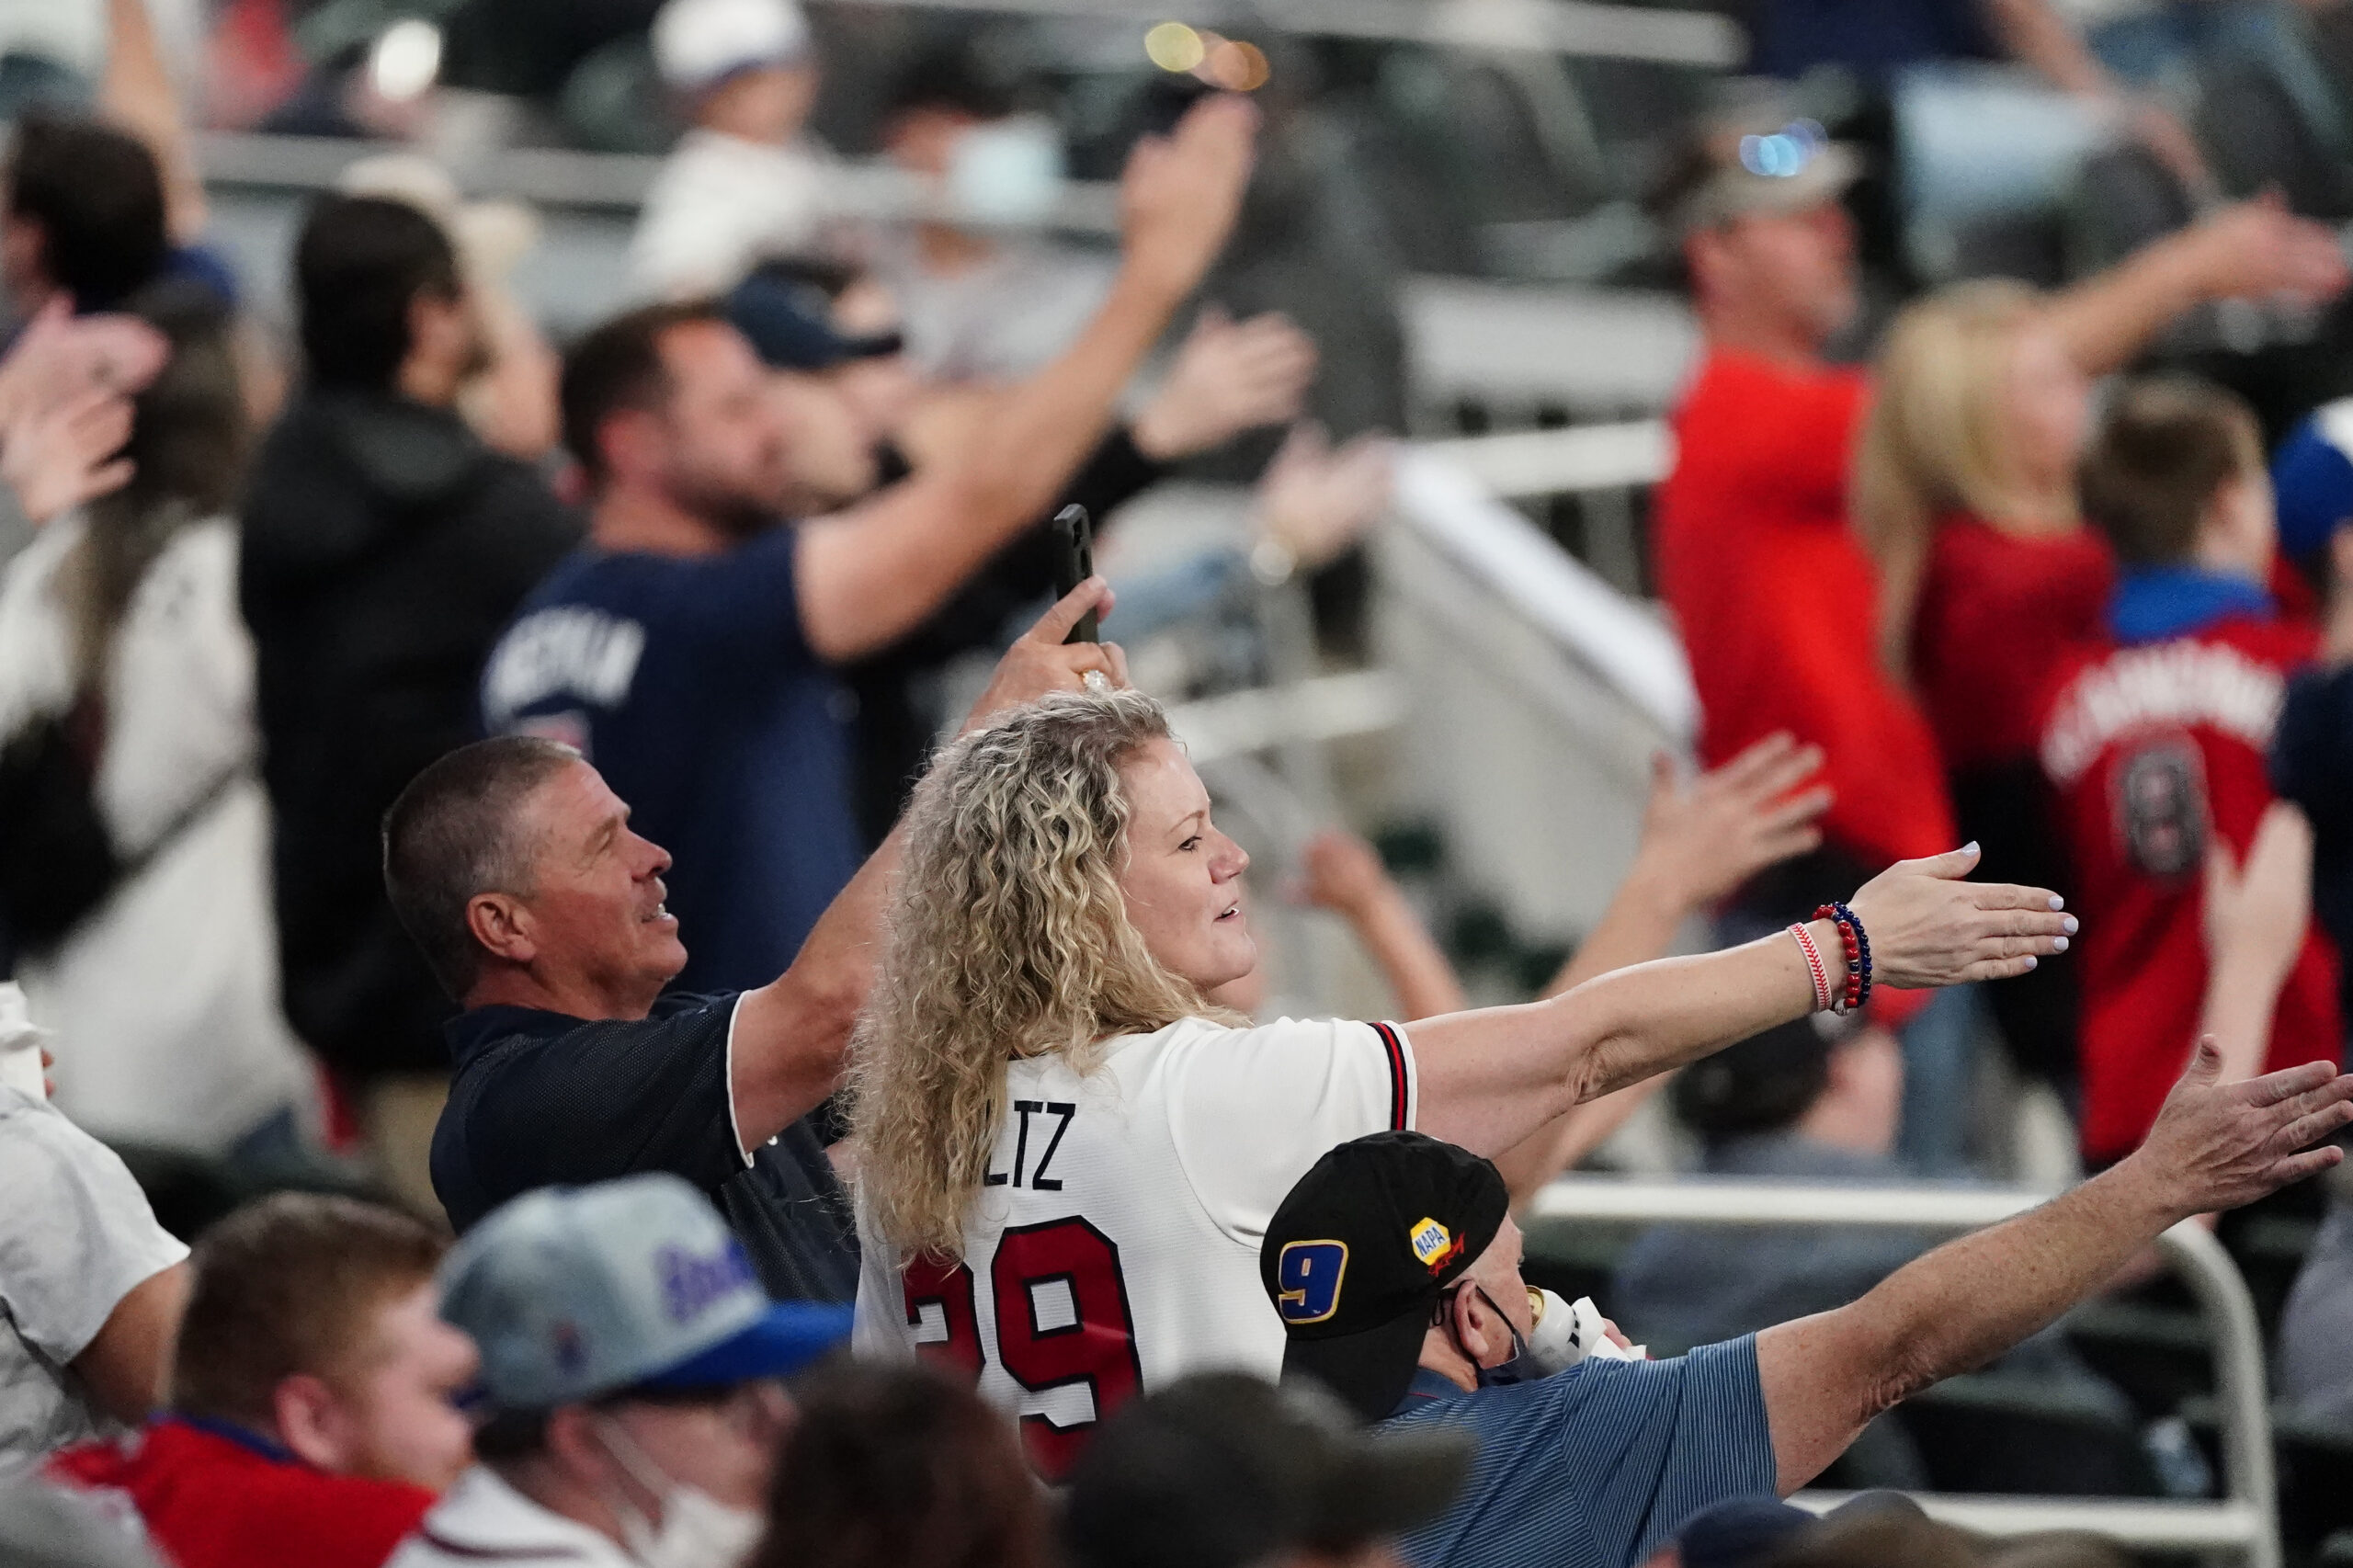 Atlanta Braves Chop, Why the Tomahawk Chop is offensive